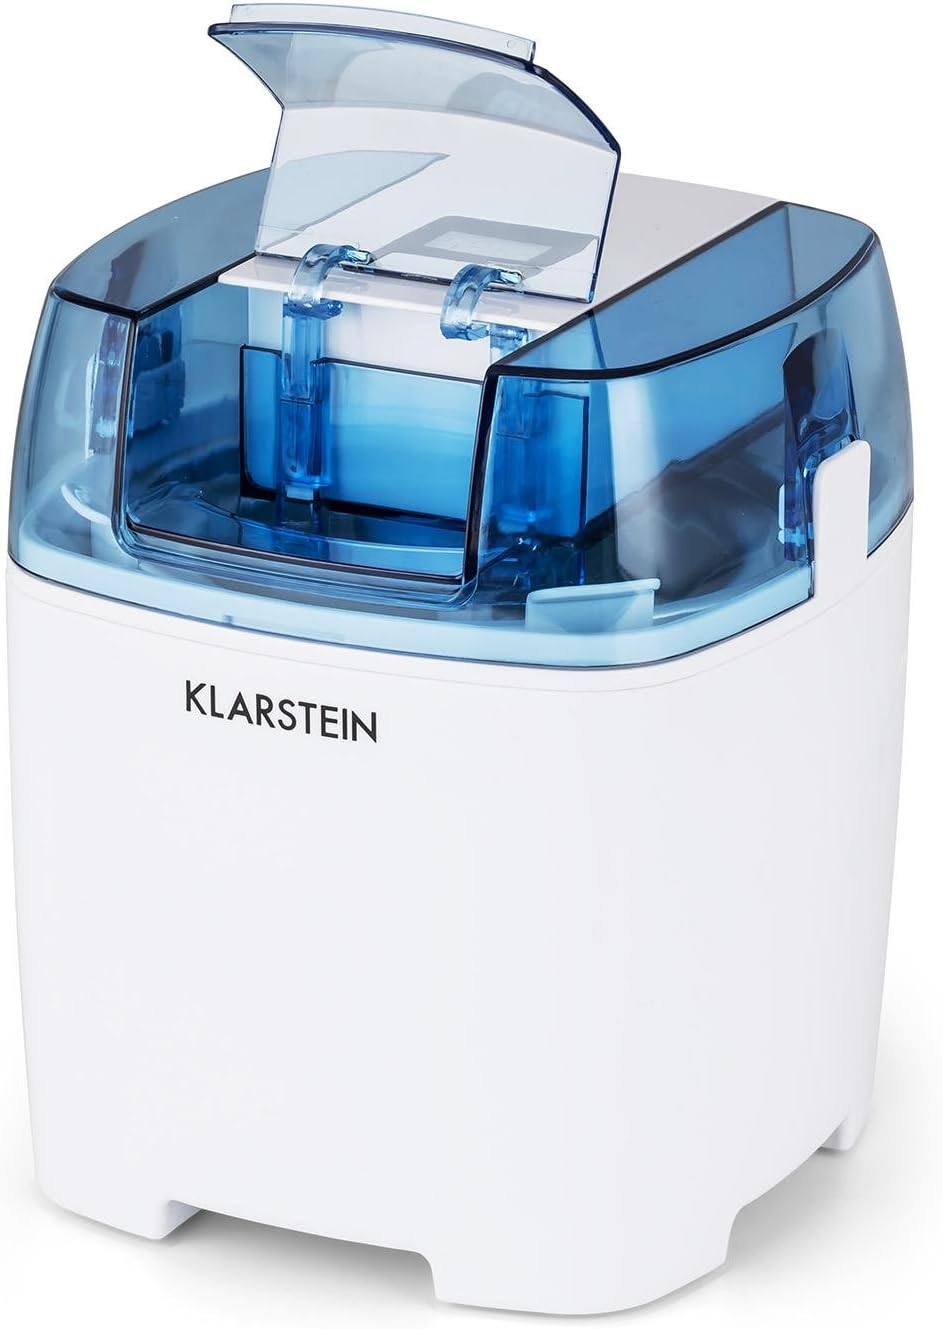 Klarstein Cream Berry 4-in-1 Ice Cream Maker | Turbo Ice Cream Machine Ice Cream Maker, Frozen Yogurt, Milkshakes and can be used as a Bottle Cooler | 1.5 Litre Capacity